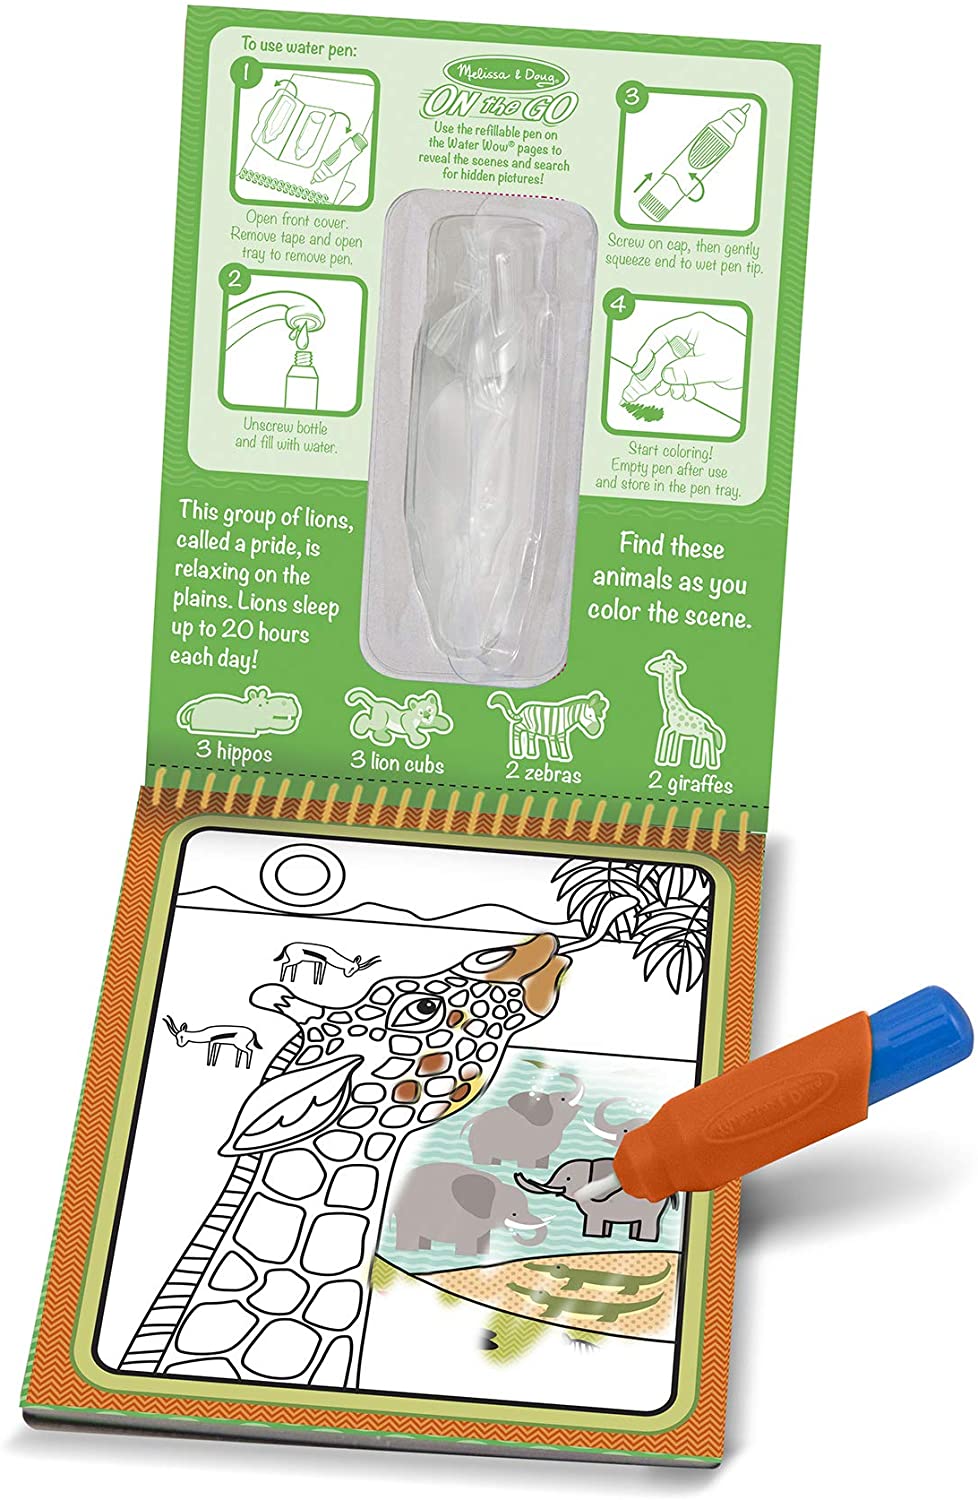 Melissa & Doug On the Go Water Wow! Reusable Water-Reveal Activity Pad - Safari - Water Base No Mess Painting